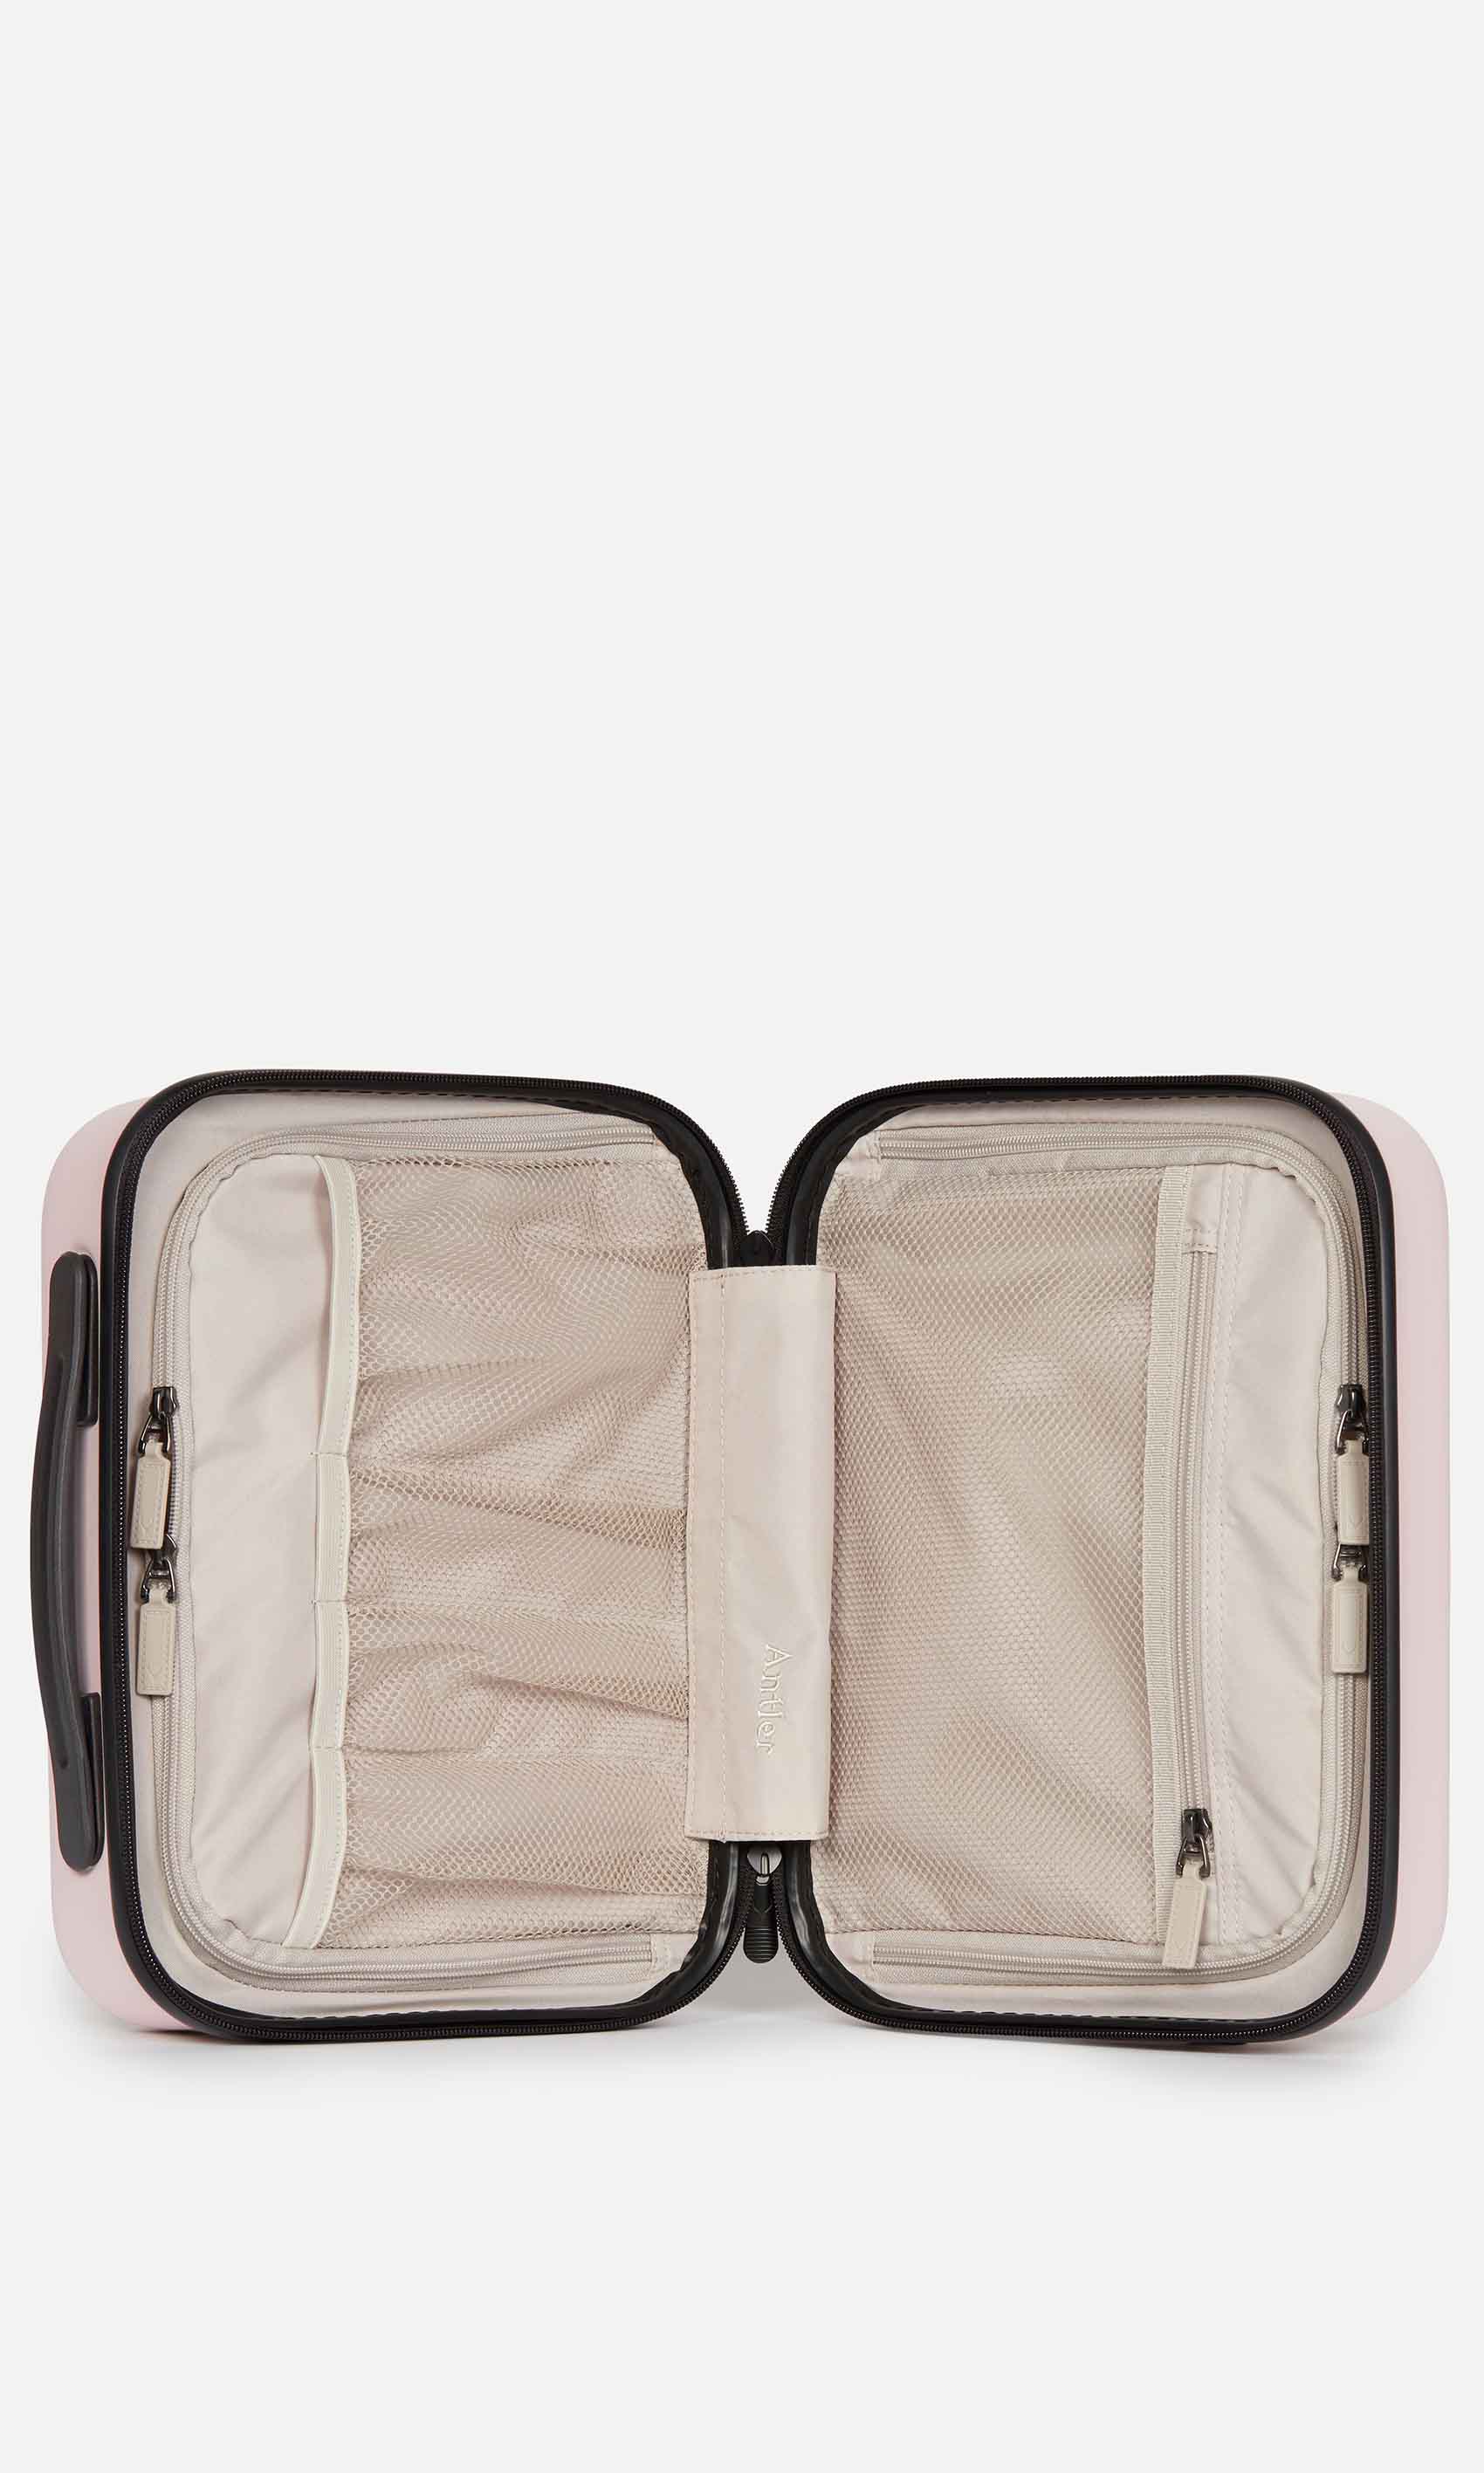 Antler Luggage -  Clifton vanity case in blush - Hard Suitcases Clifton Vanity Case Blush (Pink) | Travel Accessories & Gifts | Antler 